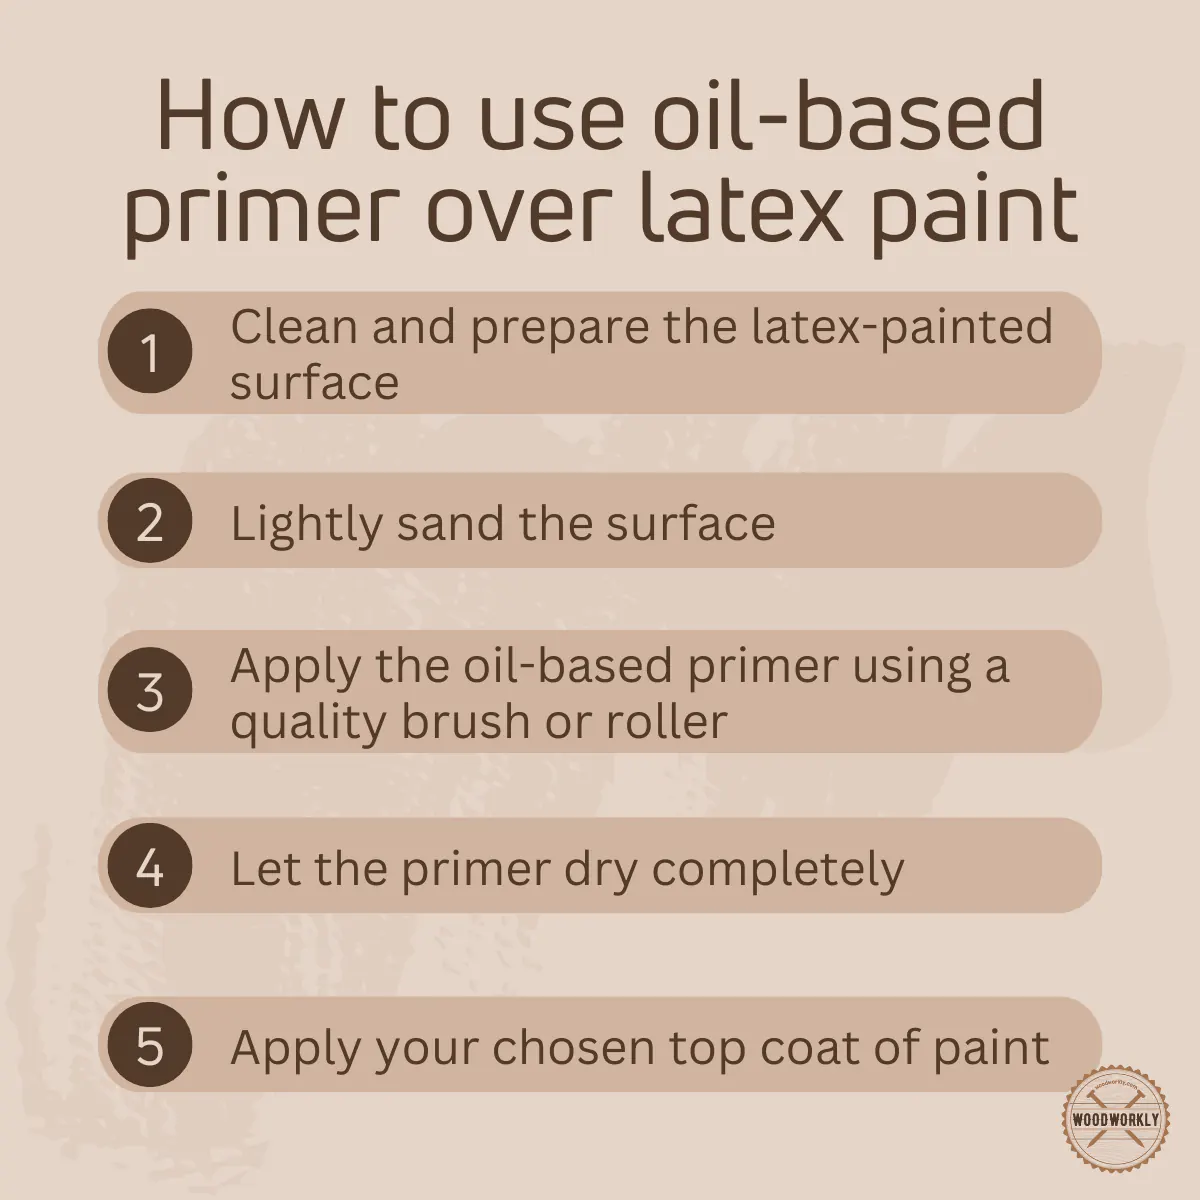 How to use oil-based primer over latex paint